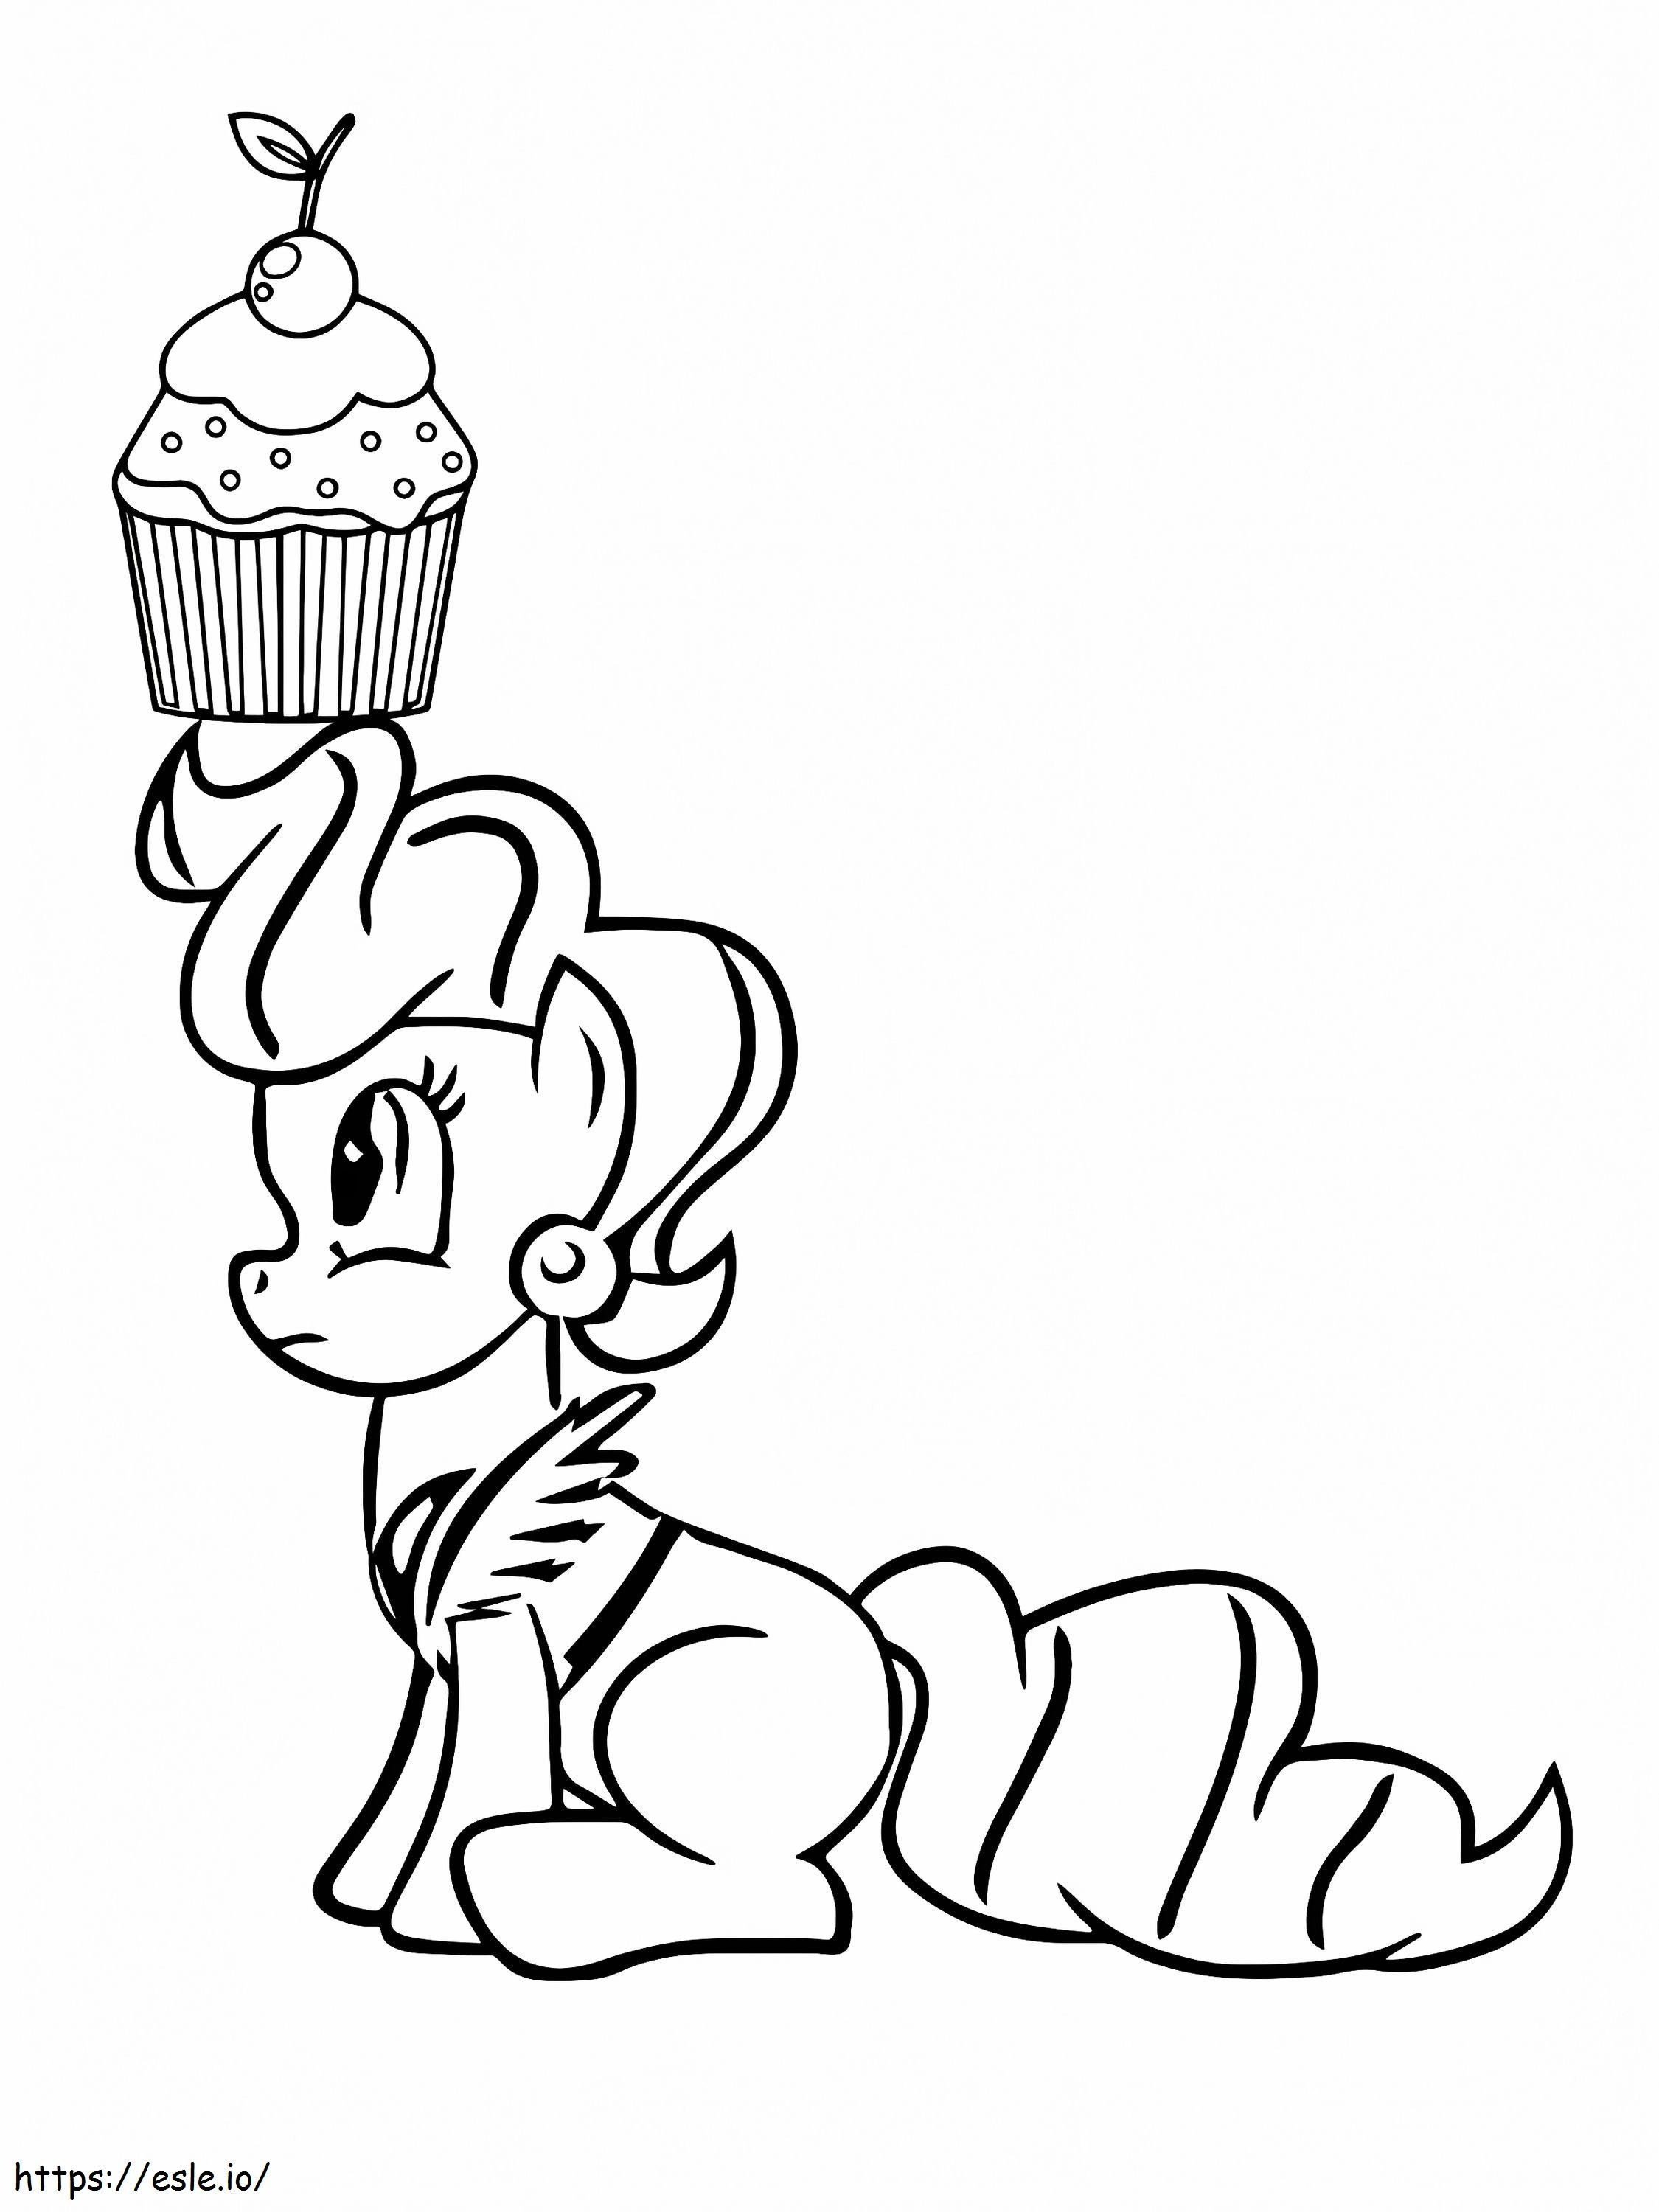 Cupcake Above The Head Of Mrs Cake coloring page